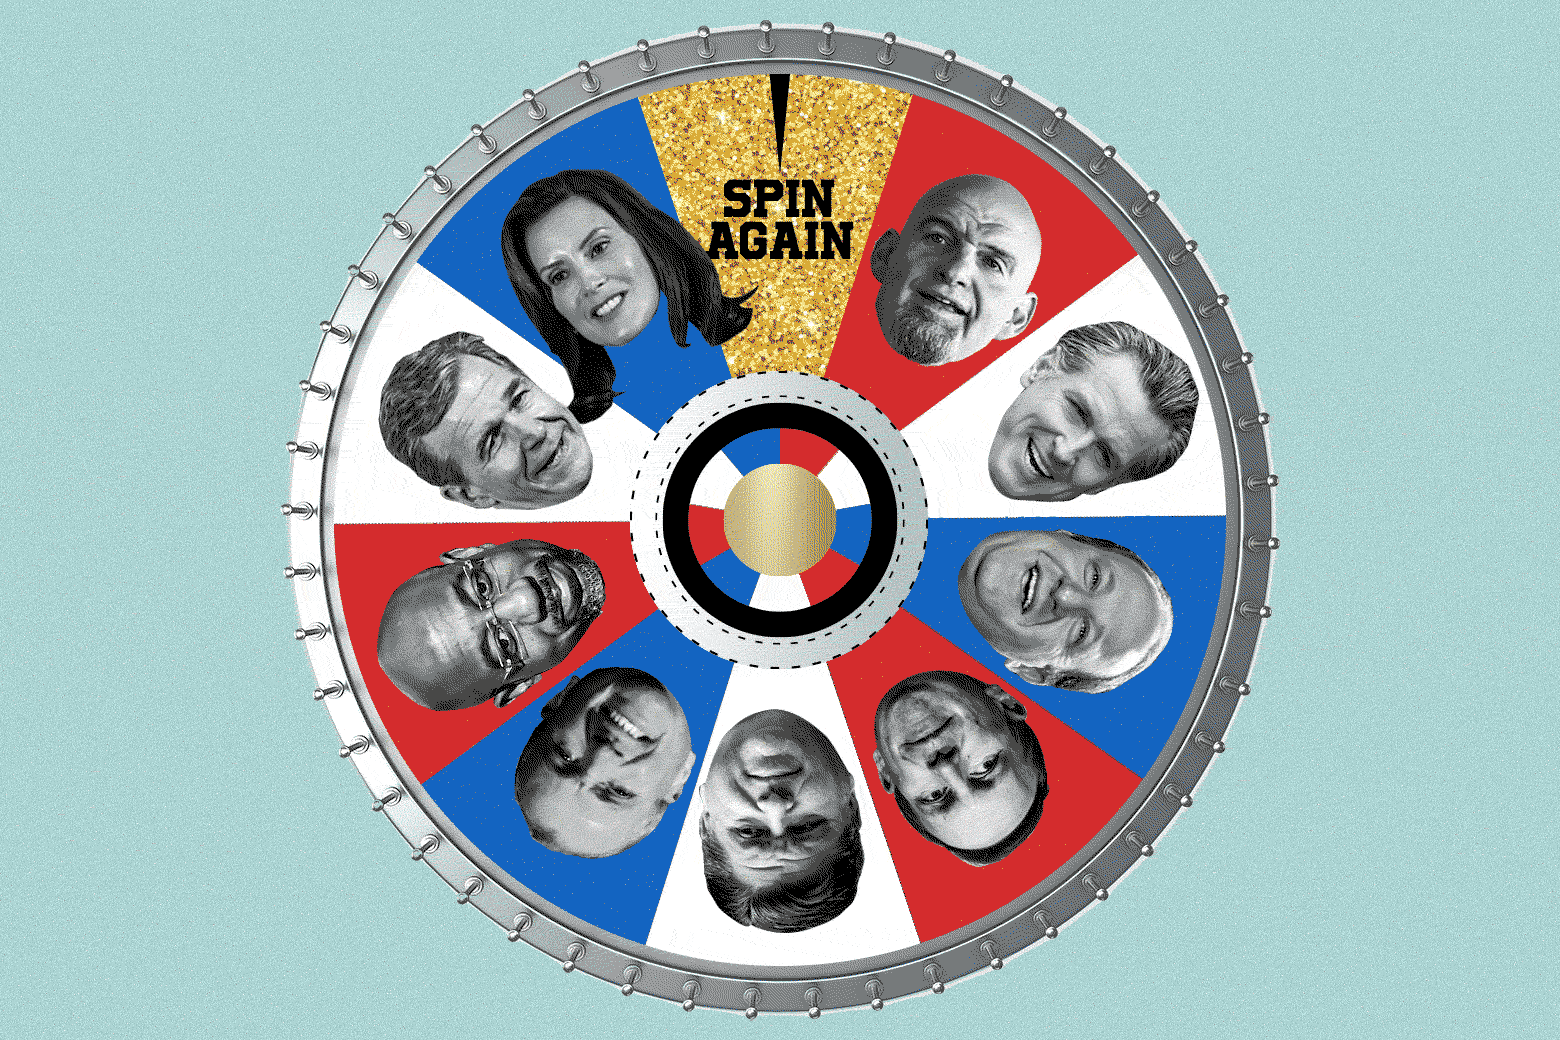 A photo illustration of potential Democratic party contenders for 2024, arrayed as if in a wheel of fortune. The wheel turns and lands on the guidance to "spin again."